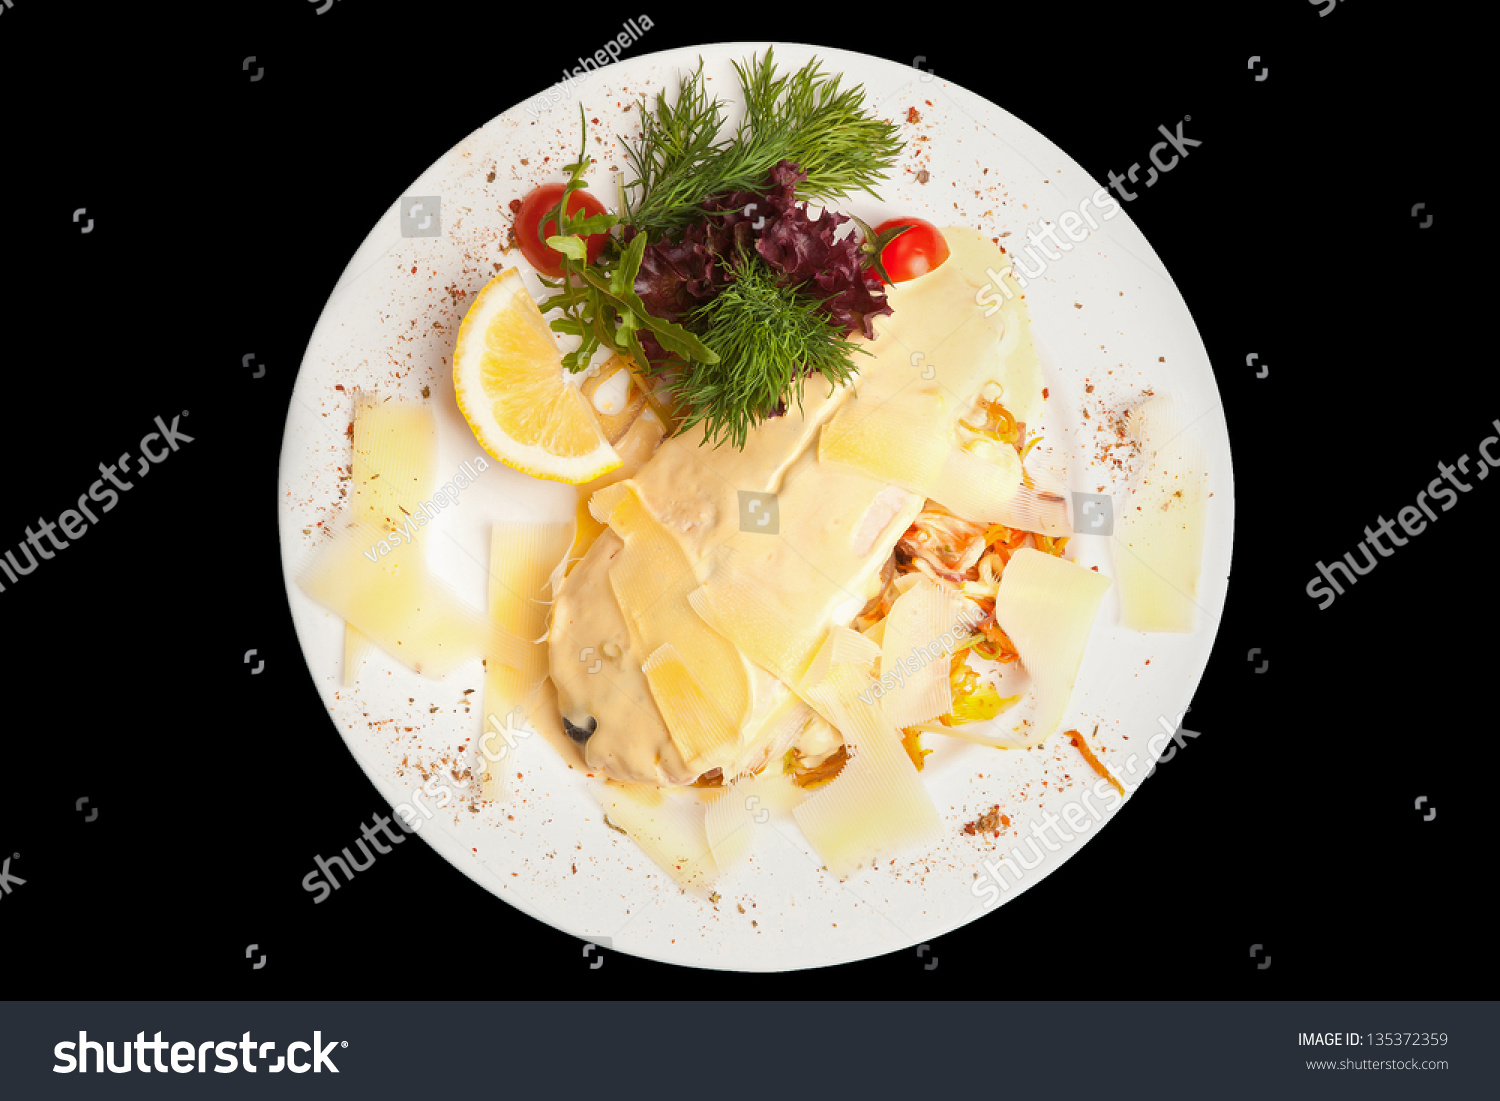 plate with food on it